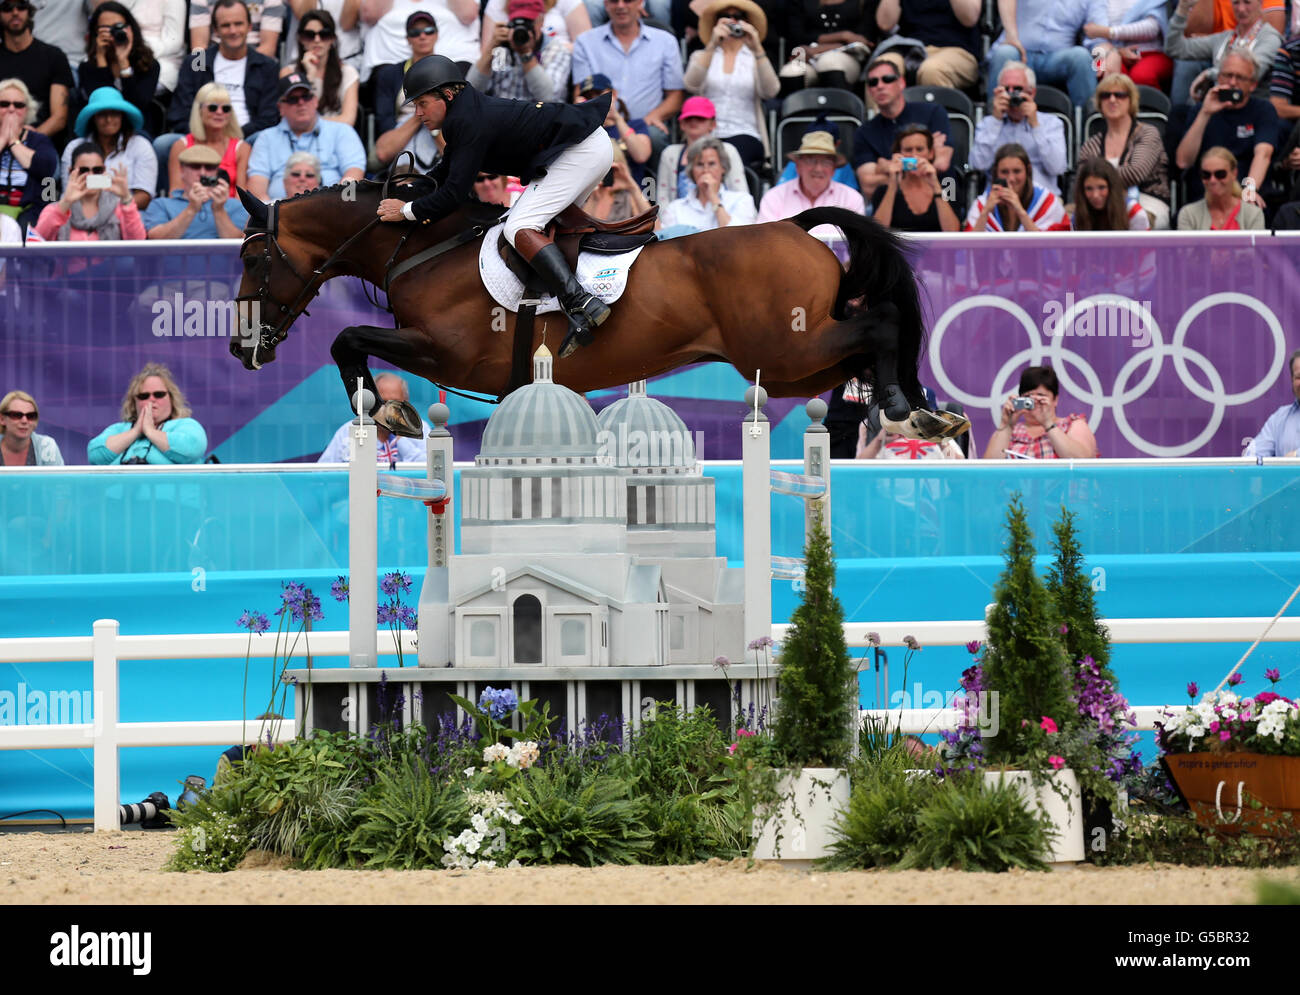 Great Britain's Nick Skelton riding Big Star in the Equestrian Jumping Individual Final Round B at Greenwich Park, on the twelfth day of the London 2012 Olympics. Stock Photo